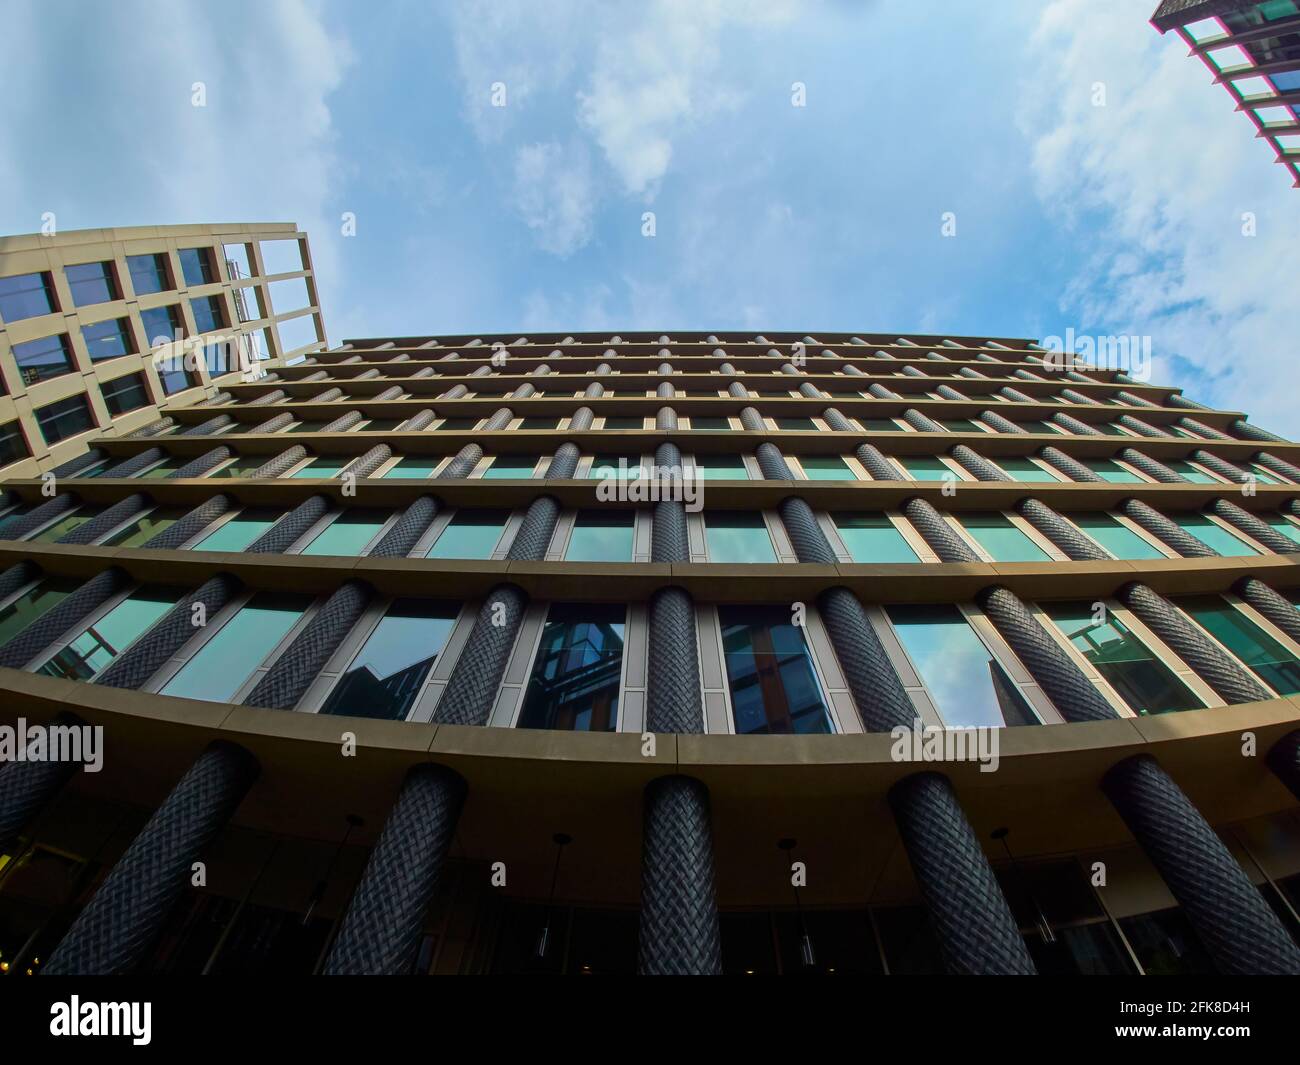 A newly built office building, part of a more general urban renewal project, seen looking up its facade to a bright blue, cloud speckled summer sky. Stock Photo